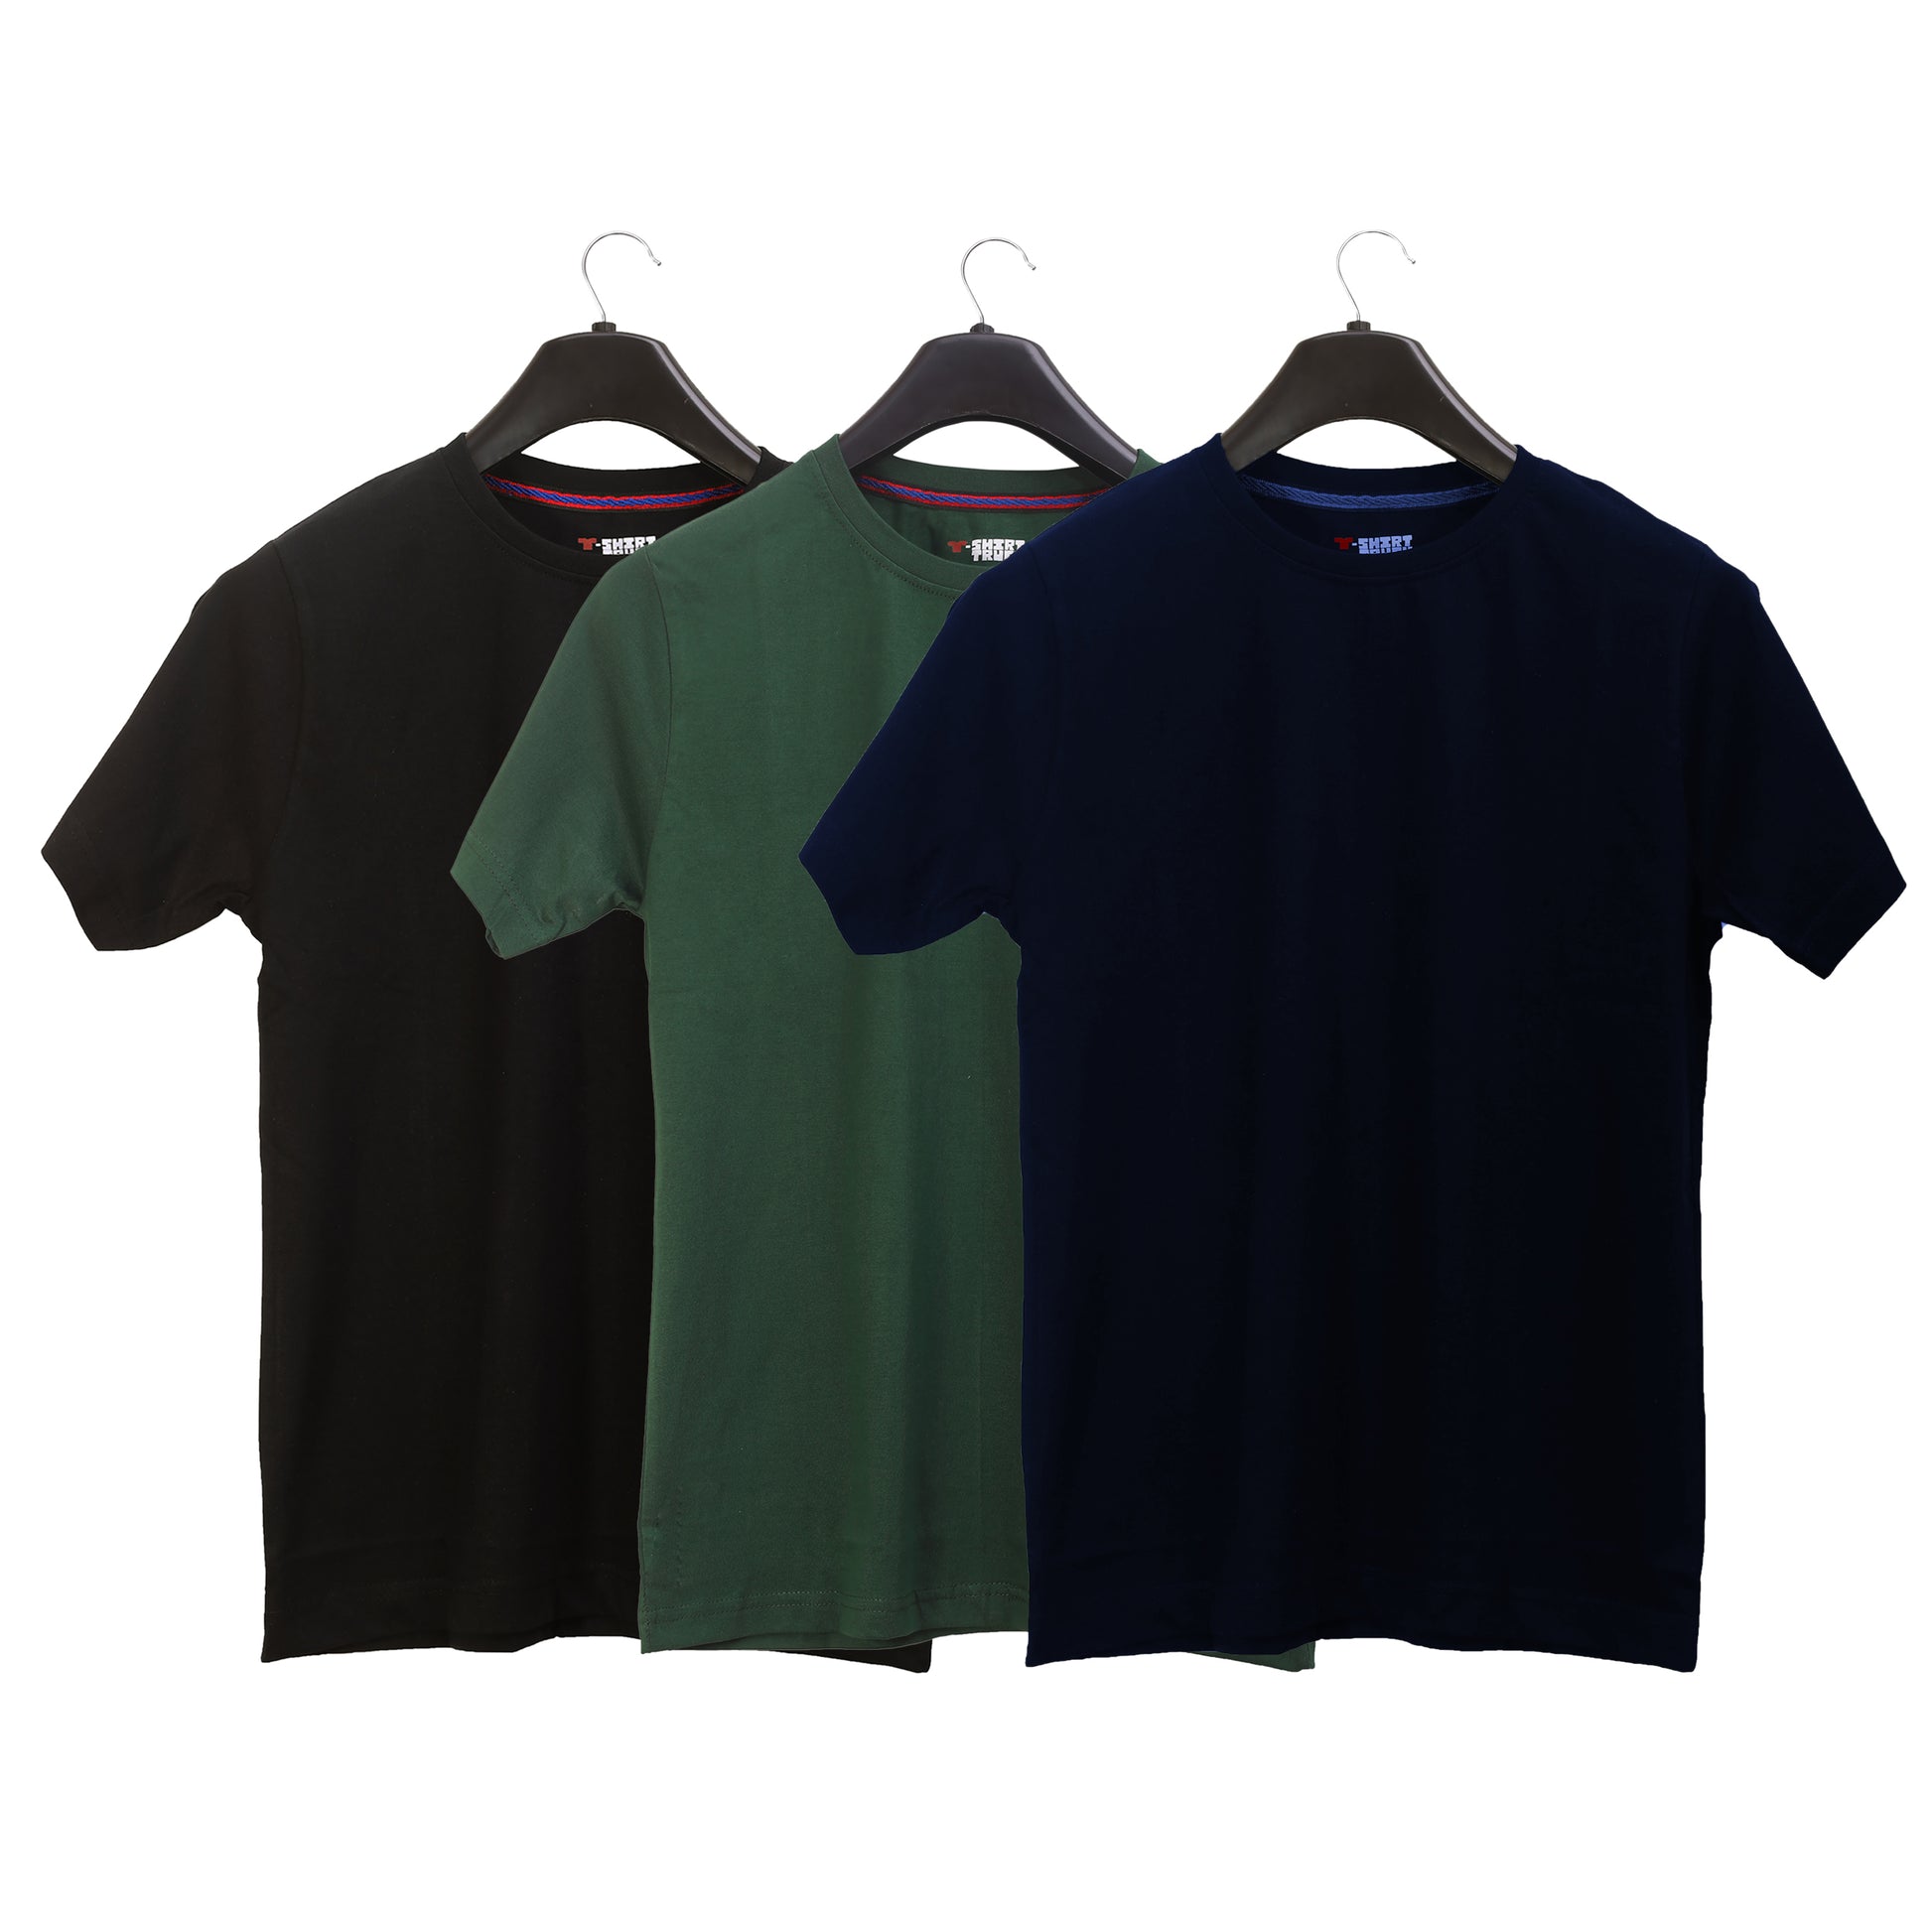 Unisex Round Neck Plain Solid Combo Pack of 3 T-shirts Green, Black & Blue